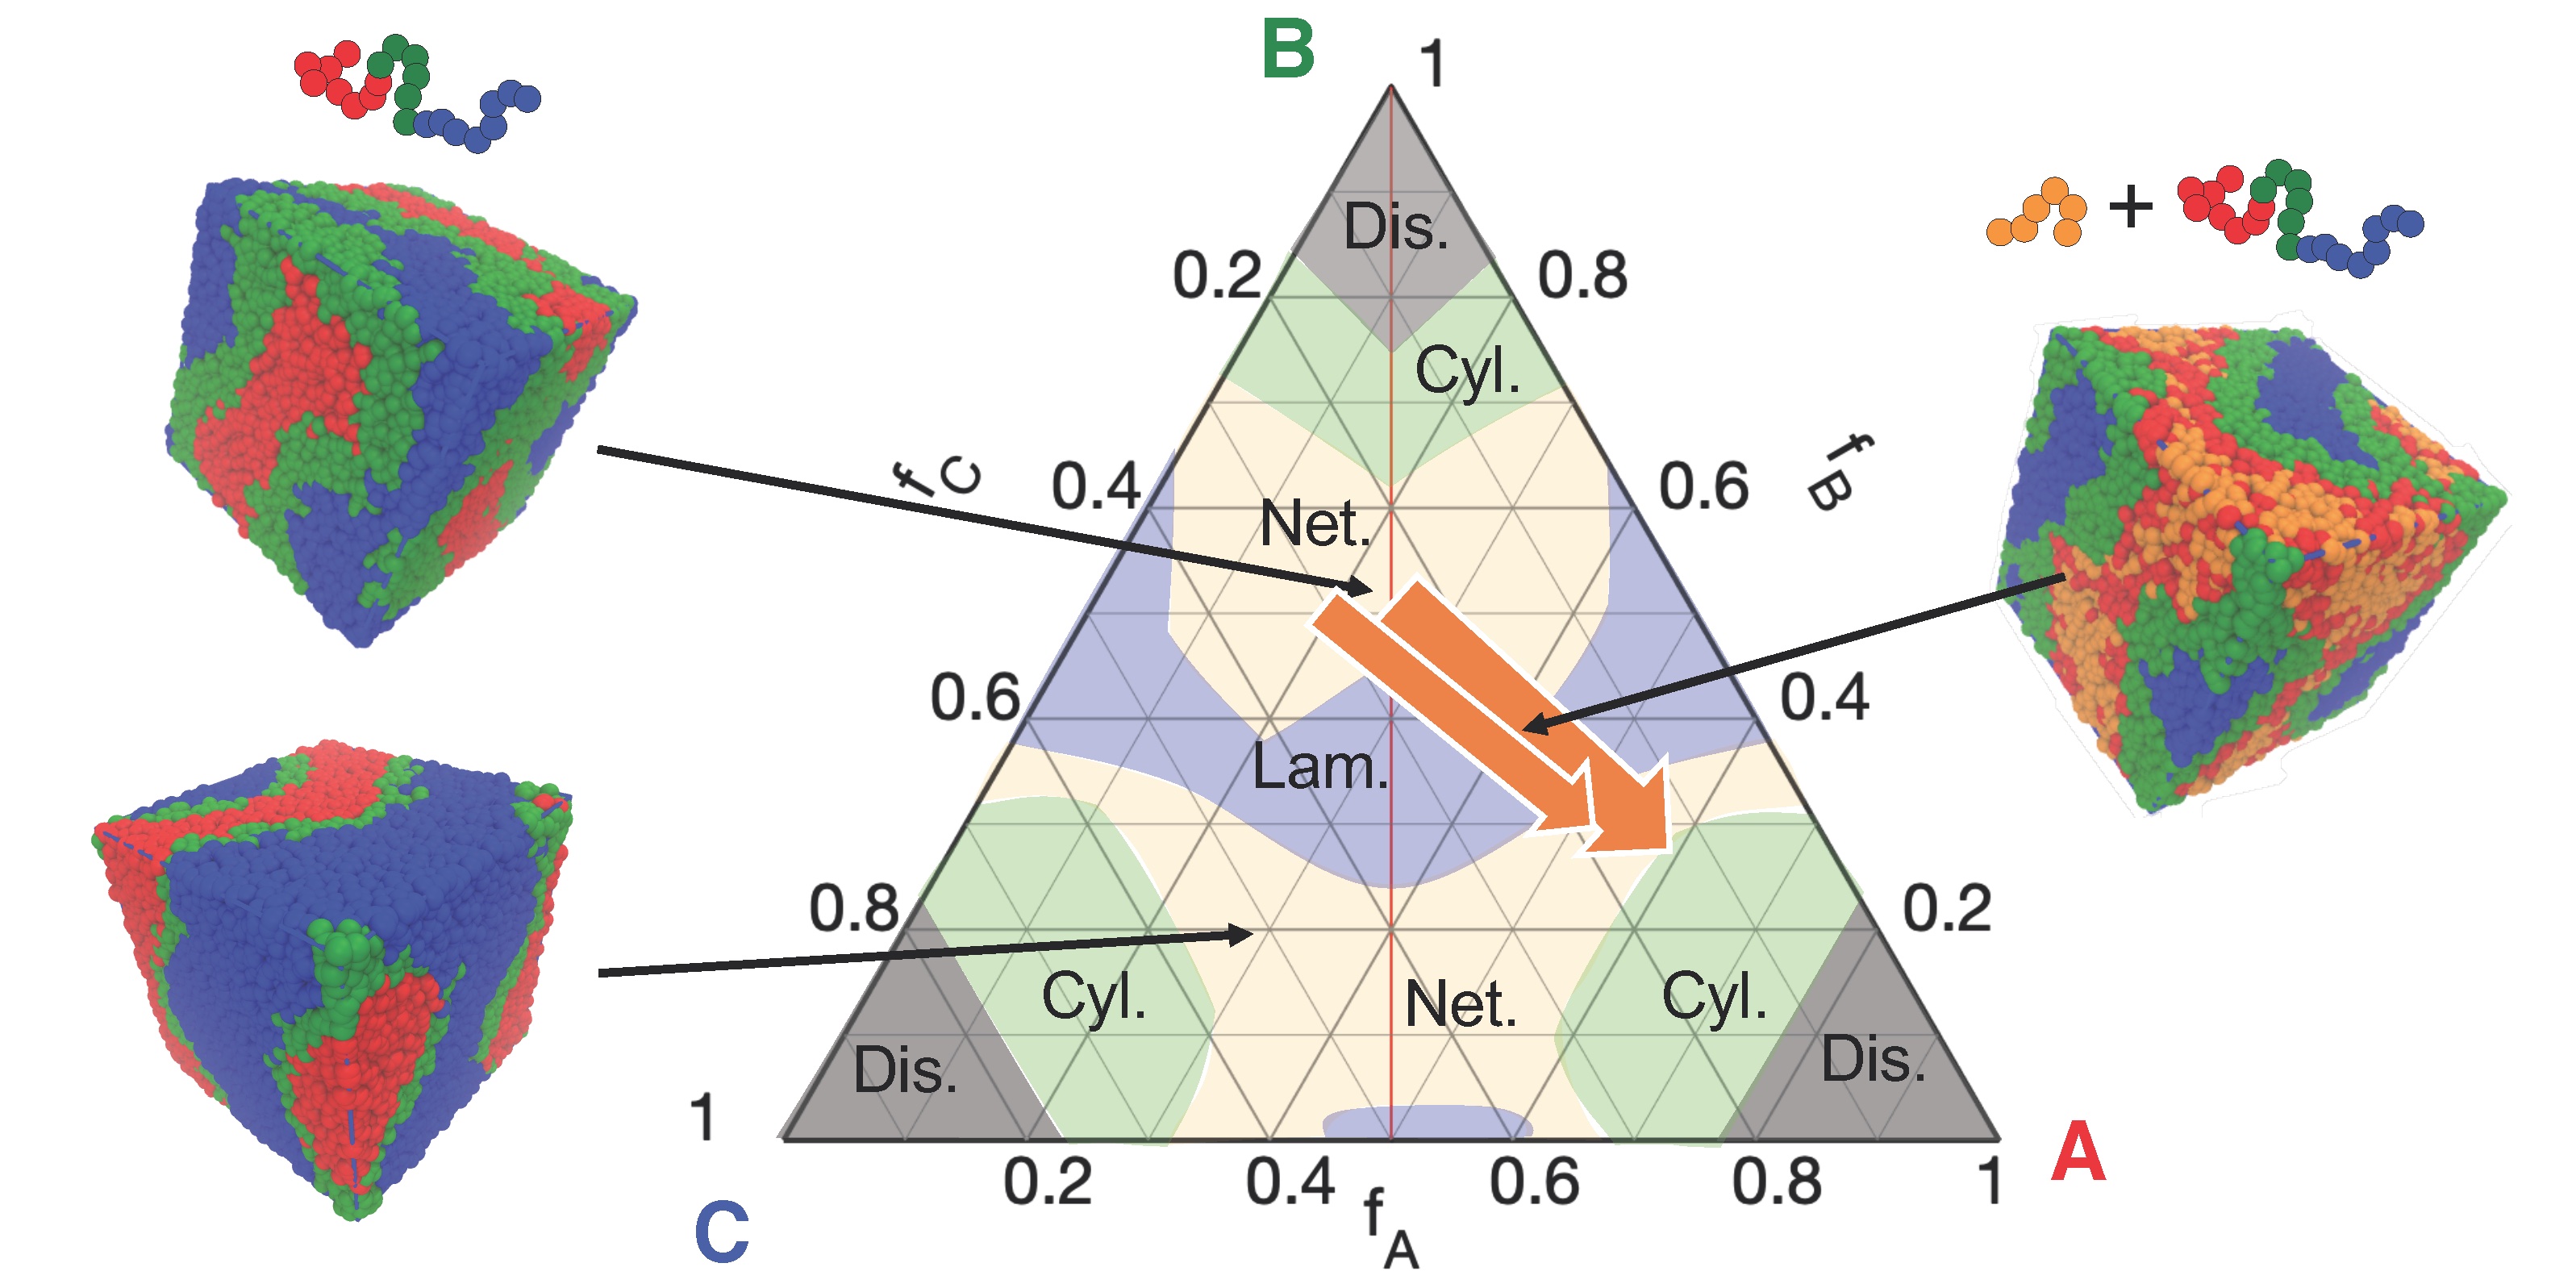 Image showing ternary phase diagram of a triblock copolymer with additional homopolymer. Complex networks, particularly, the gyroid, are stabilized by addition of homopolymer.